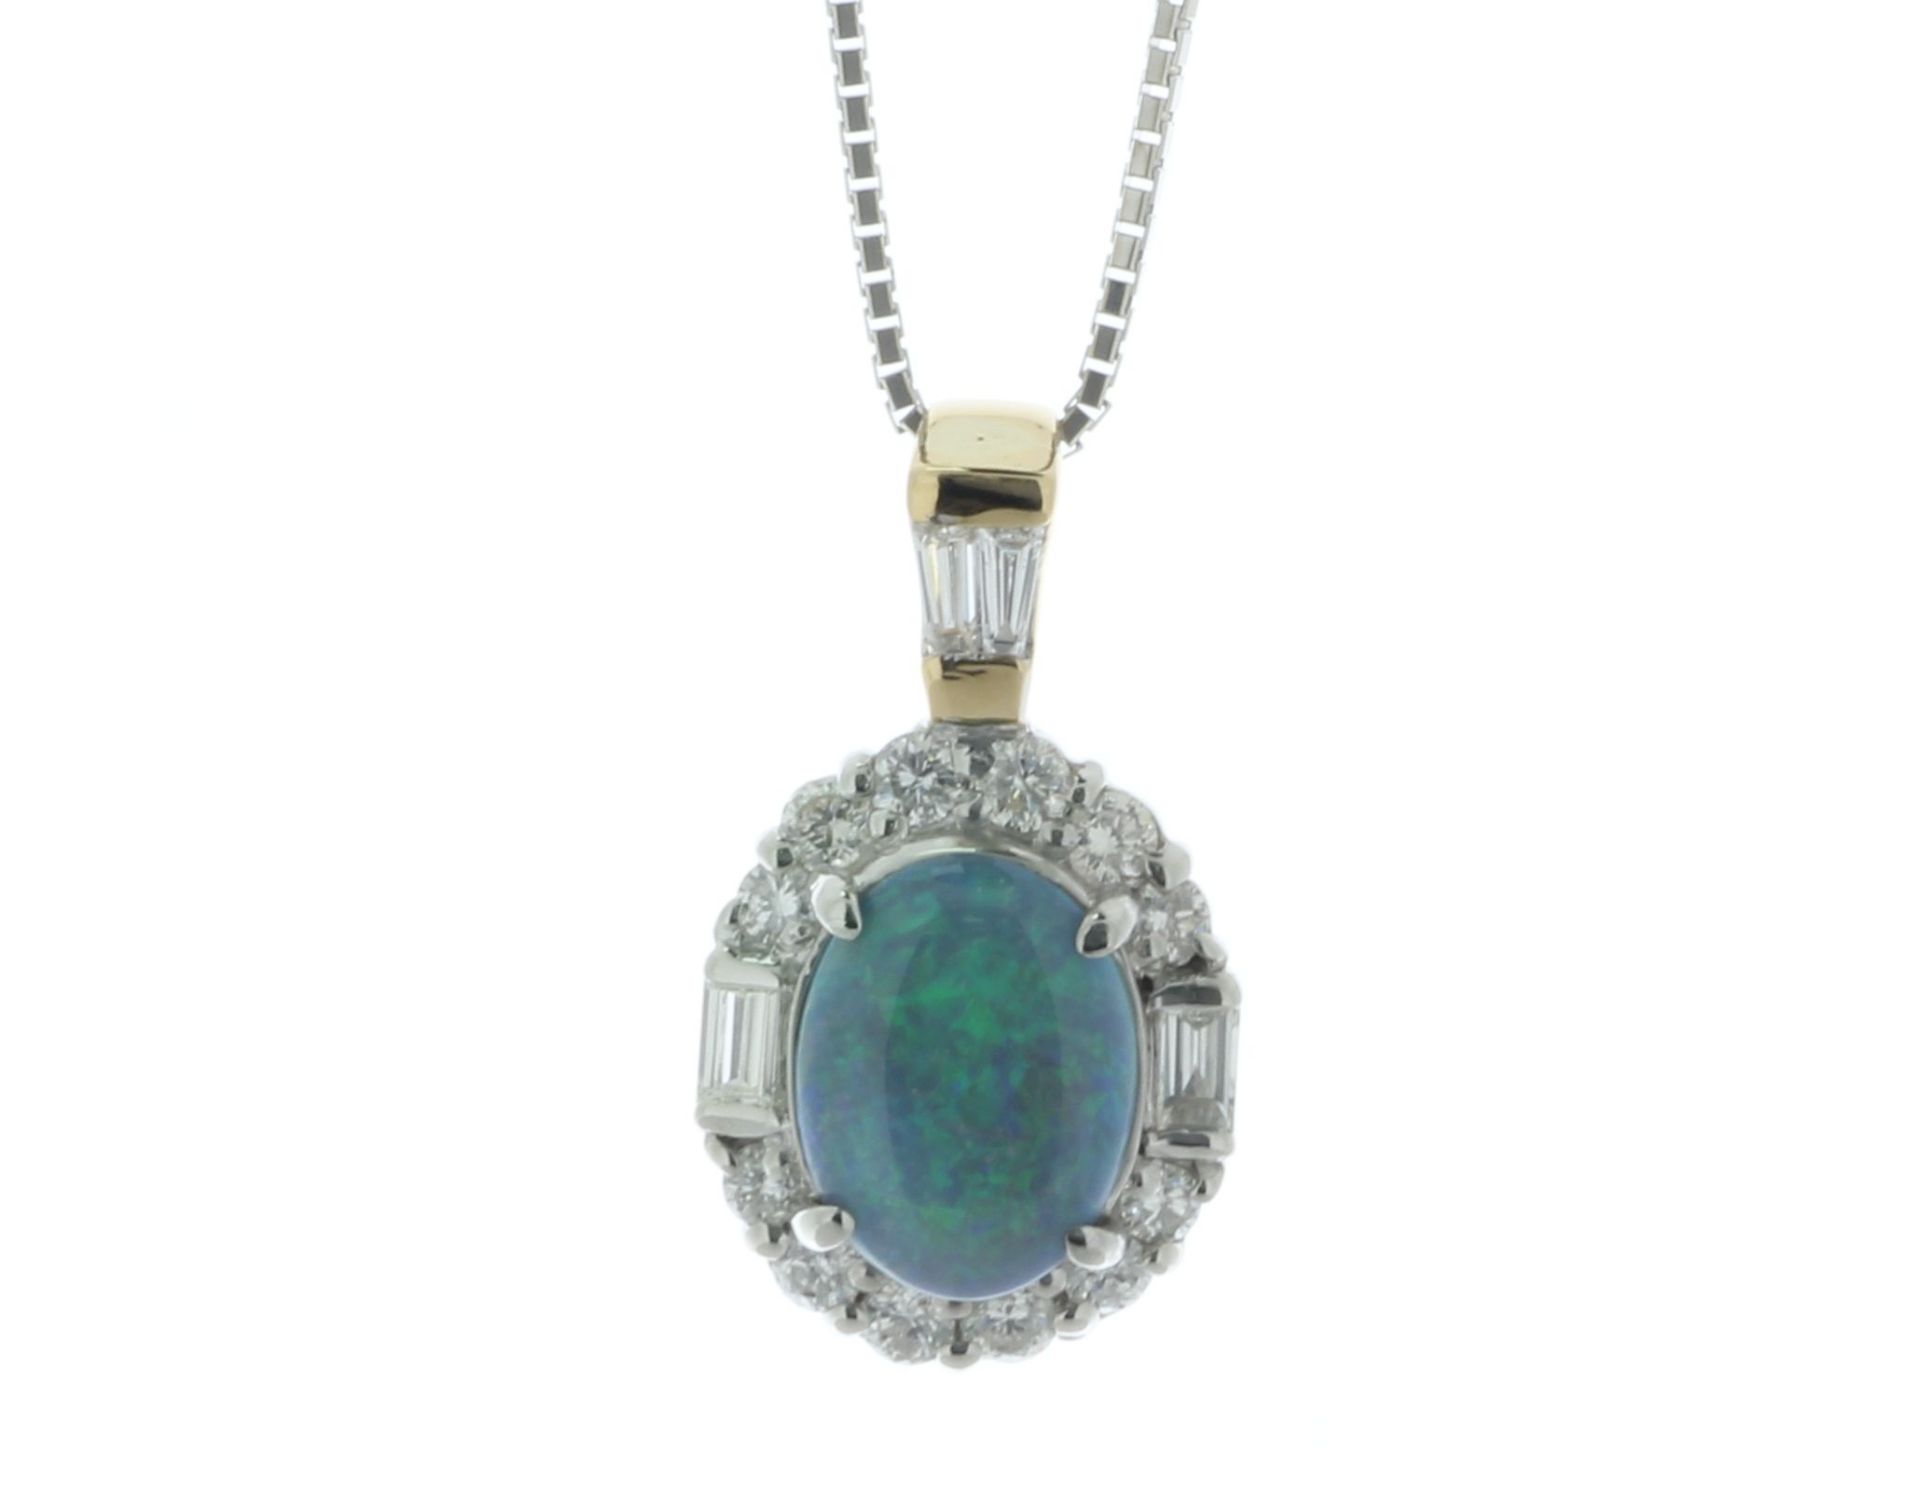 18ct White And Yellow Gold Oval Cluster Diamond And Opal Pendant (O1.30) 0.54 Carats - Valued By IDI